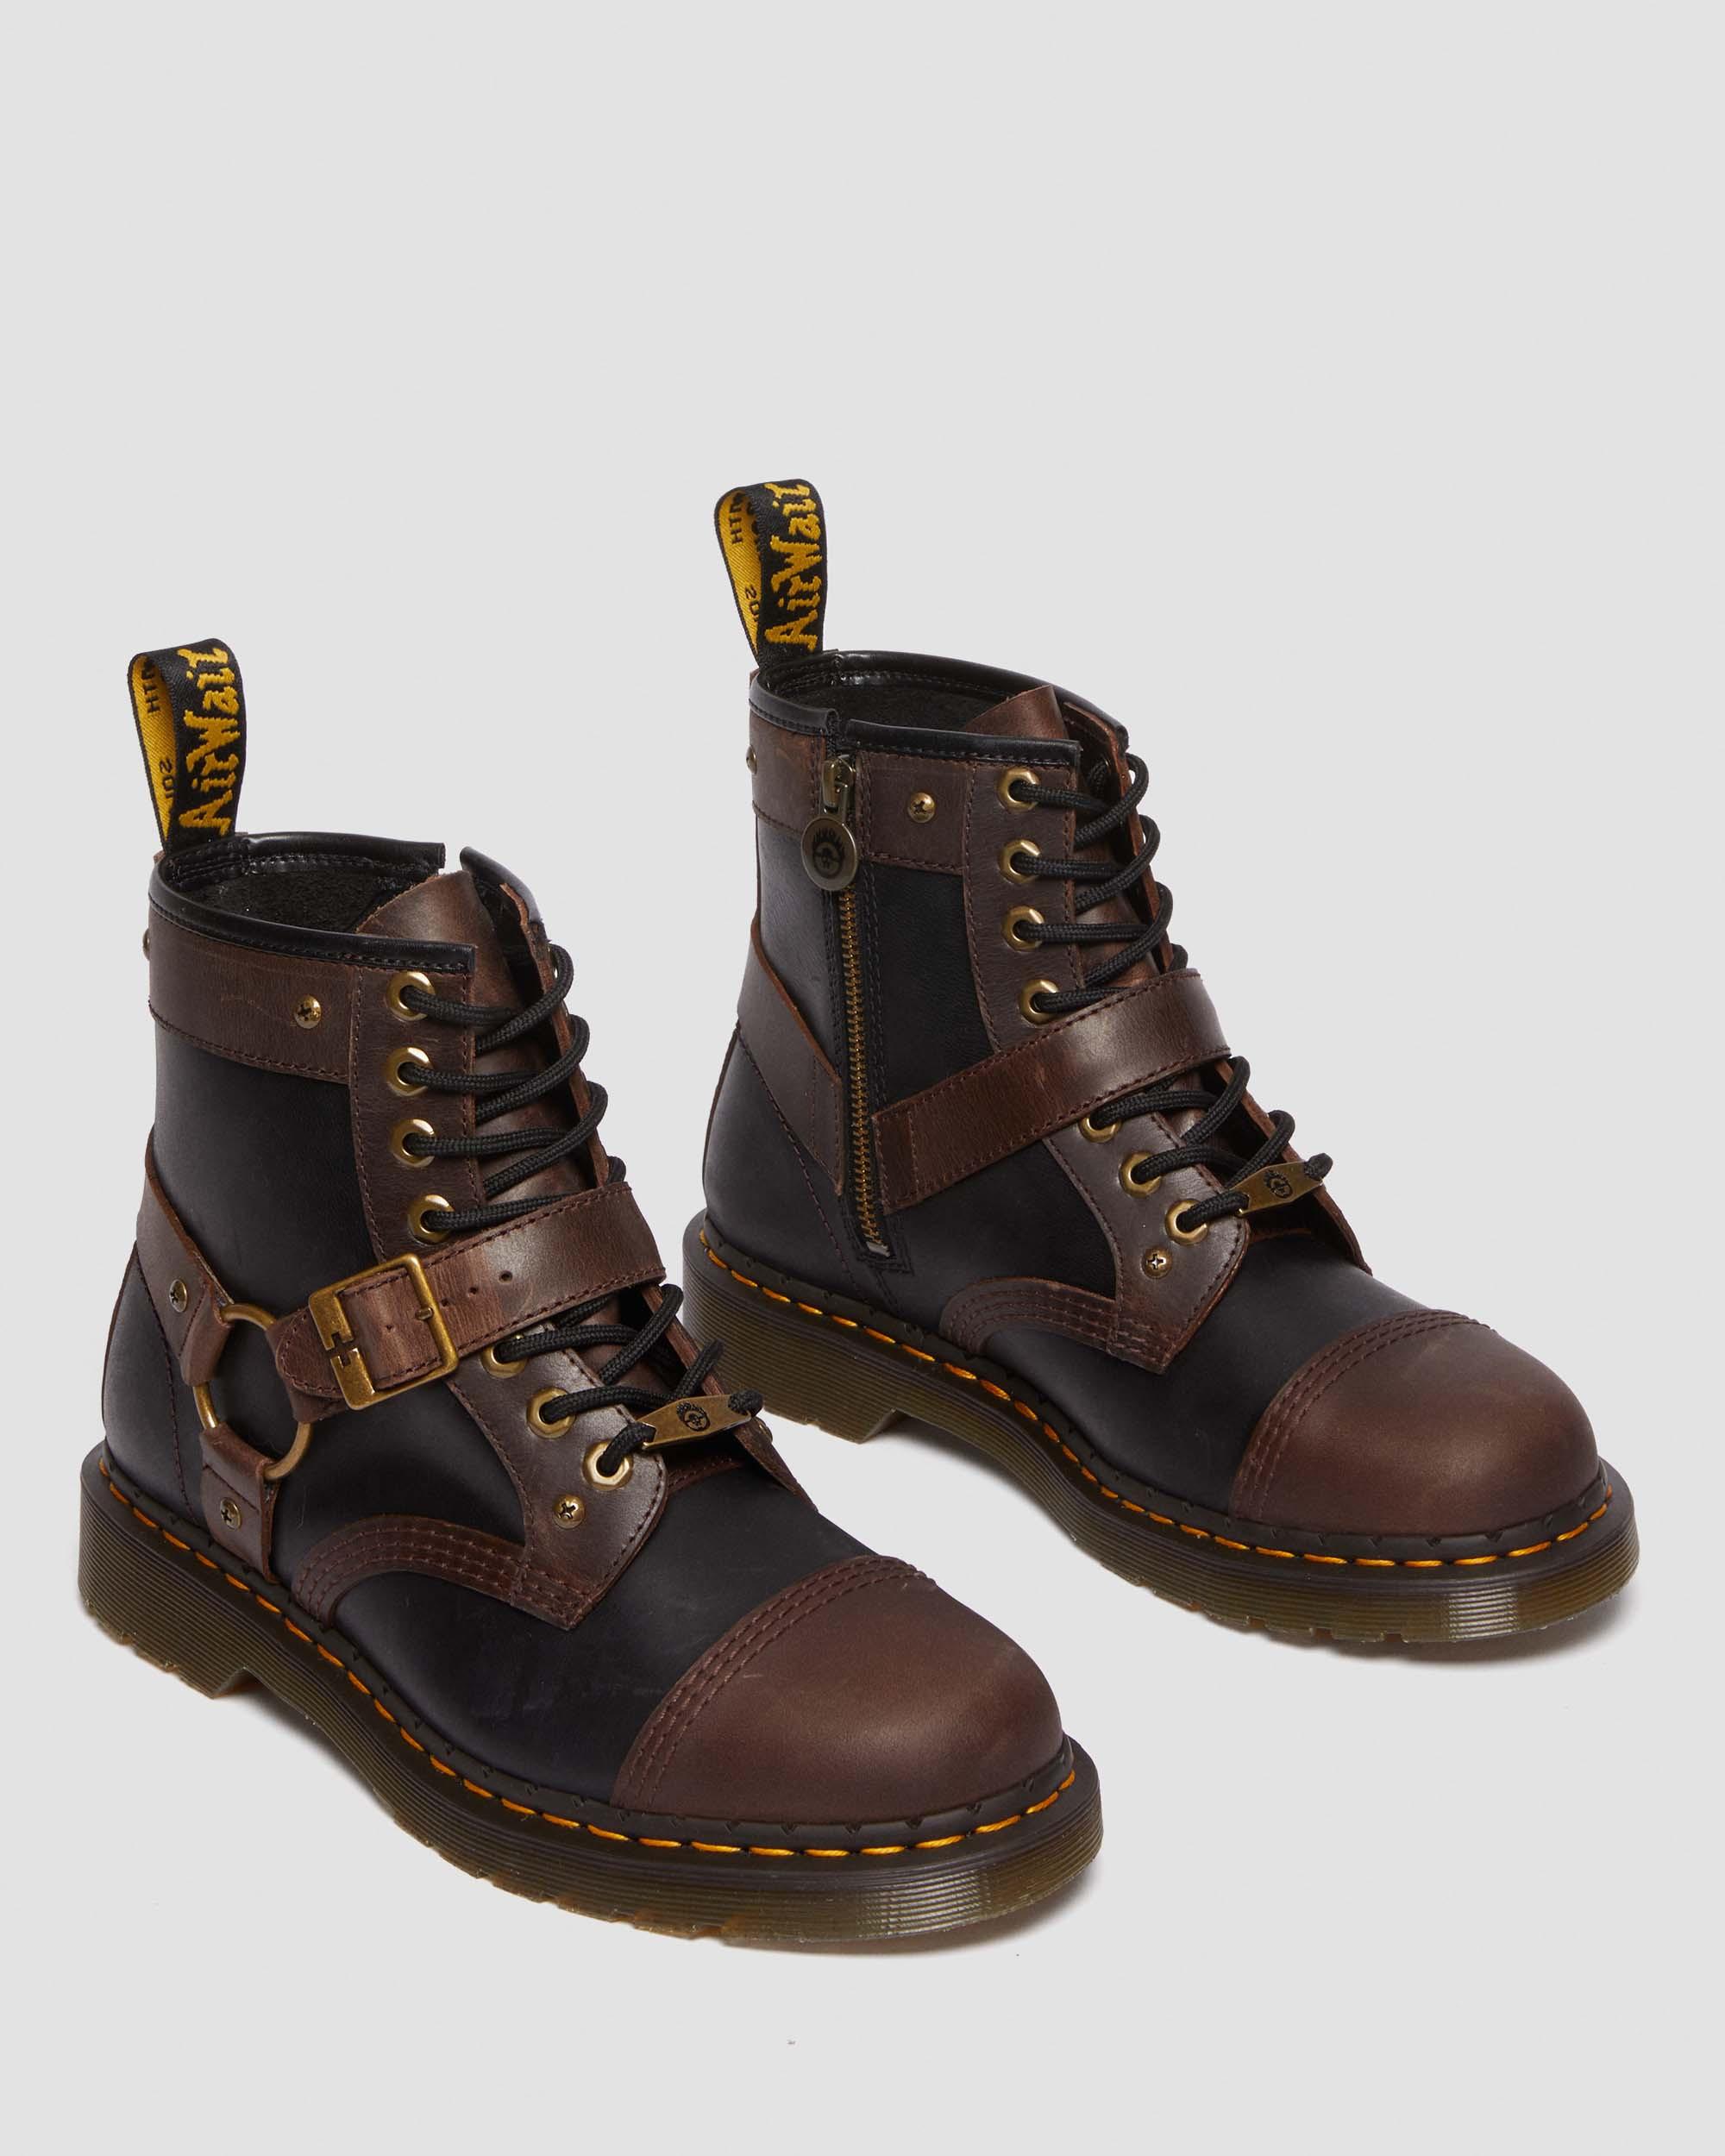 1460 Mad Max Leather Boots1460 Mad Max Leather Boots Dr. Martens